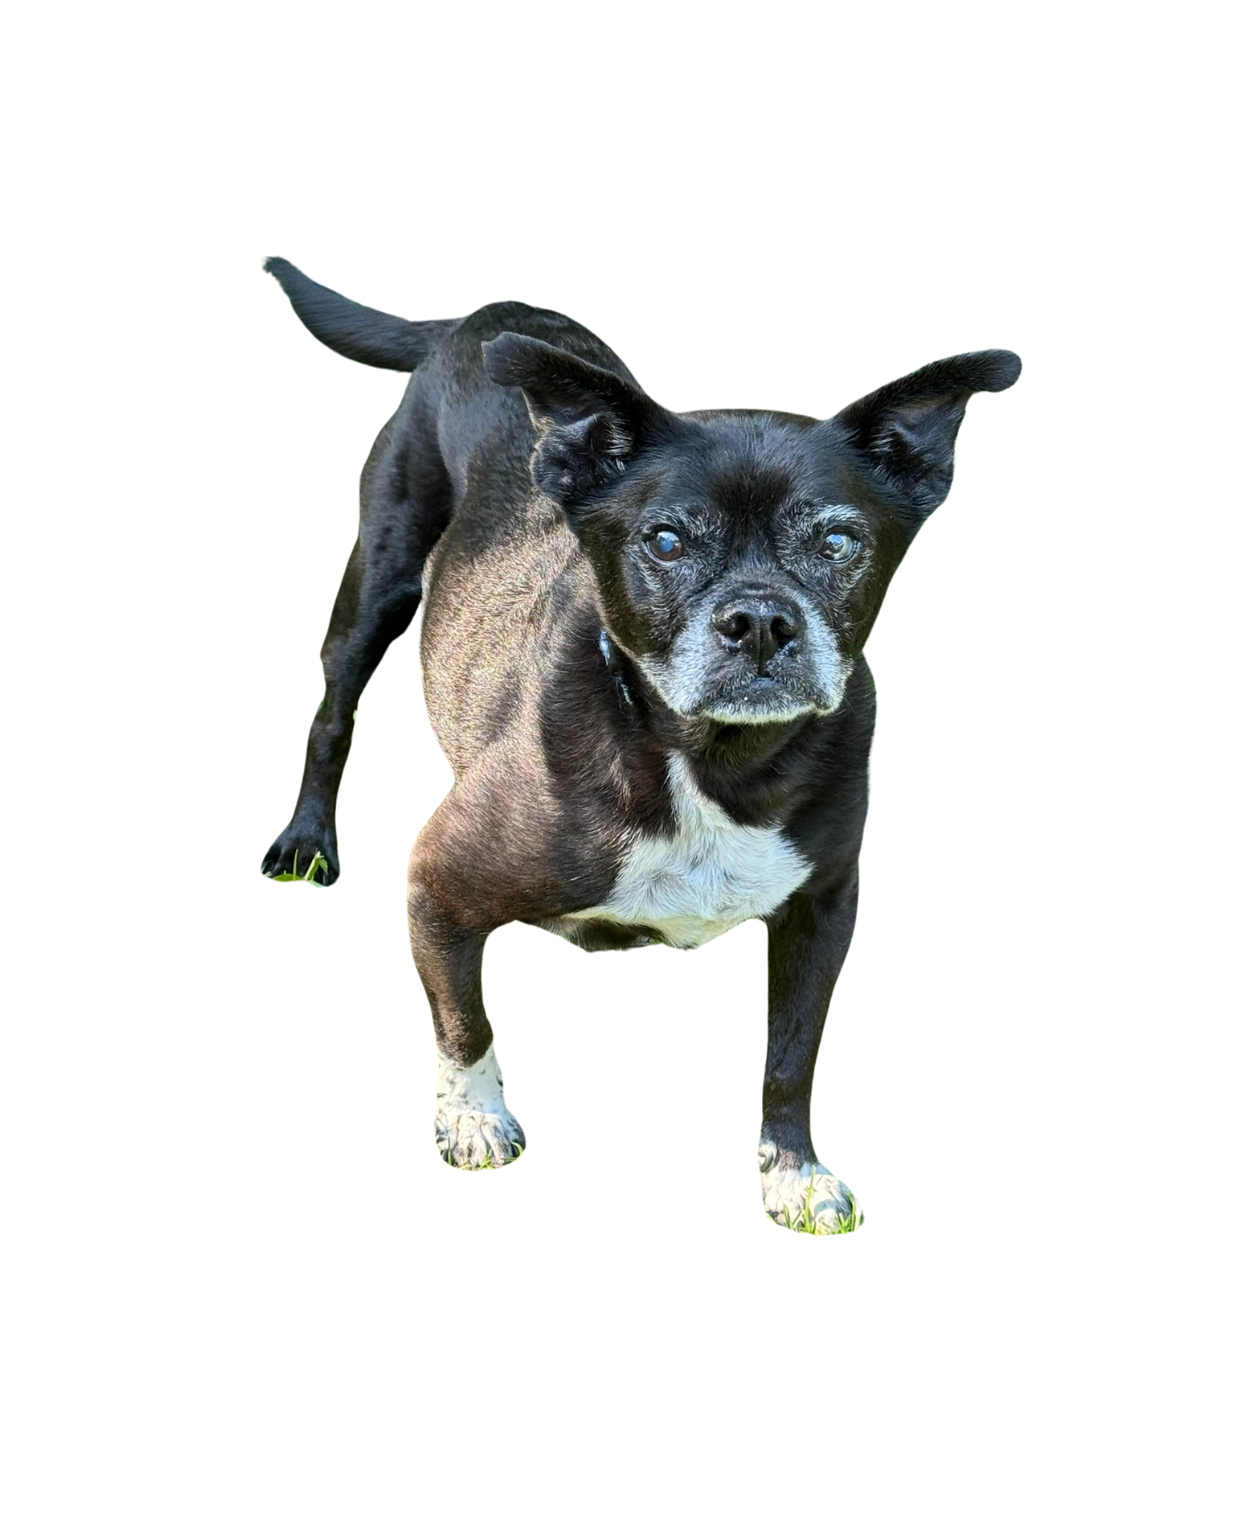 A black and white dog is standing on a white background.